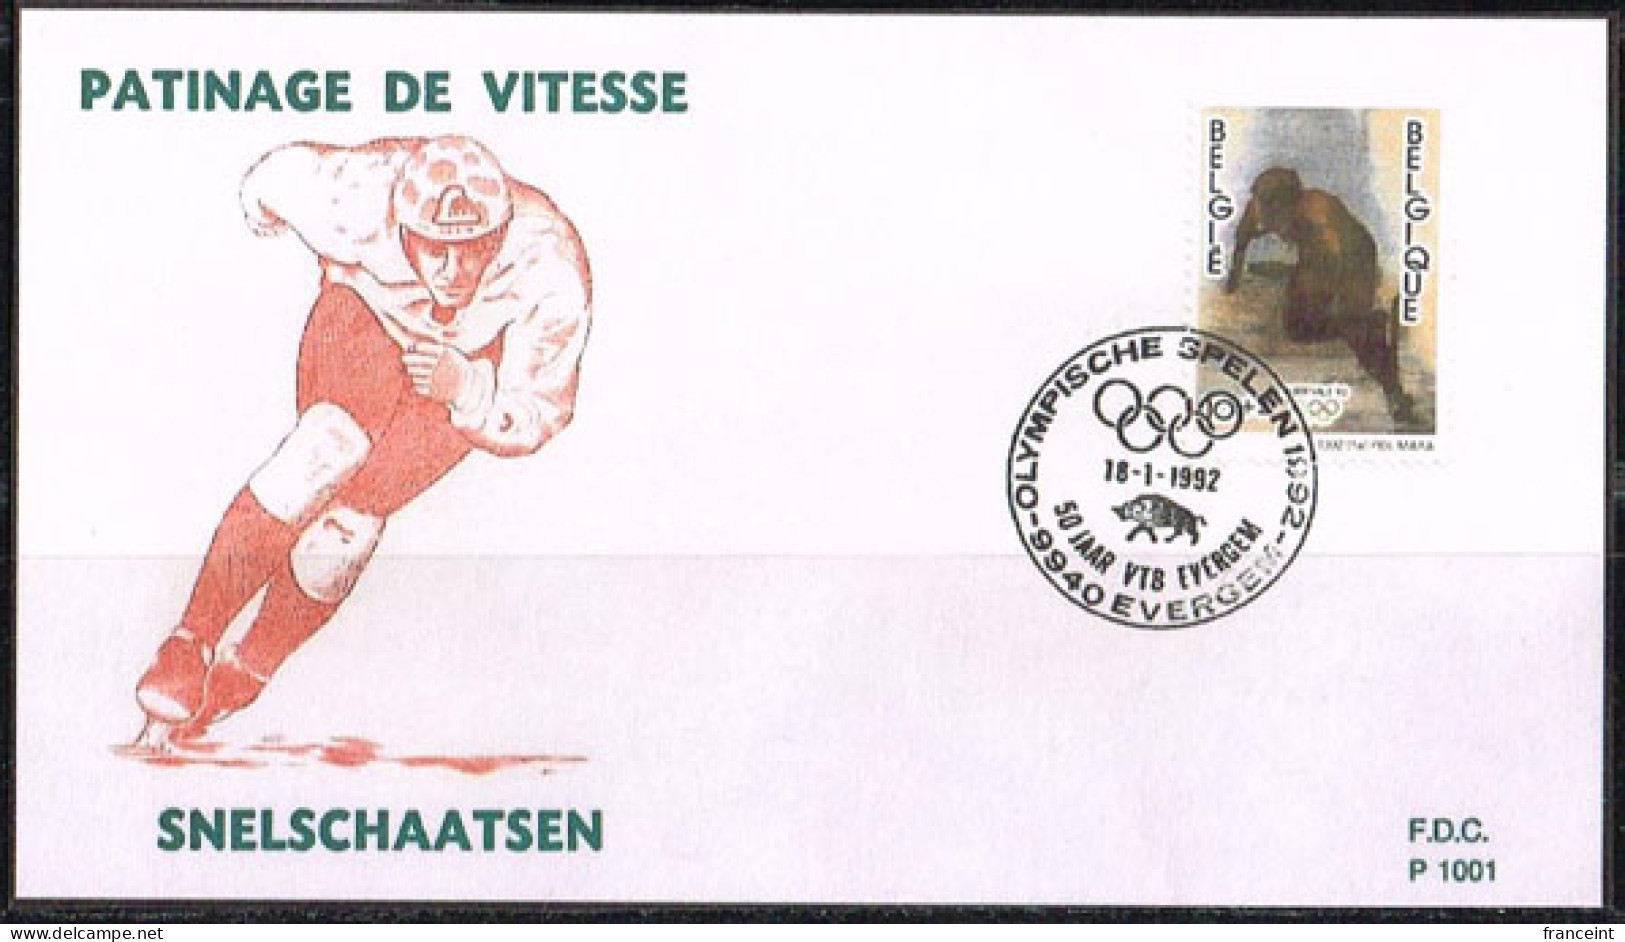 BELGIUM(1992) Speed Skating. Die Proof In Black Signed By The Engraver, Representing The FDC Cachet. Scott No B1101. - Prove E Ristampe